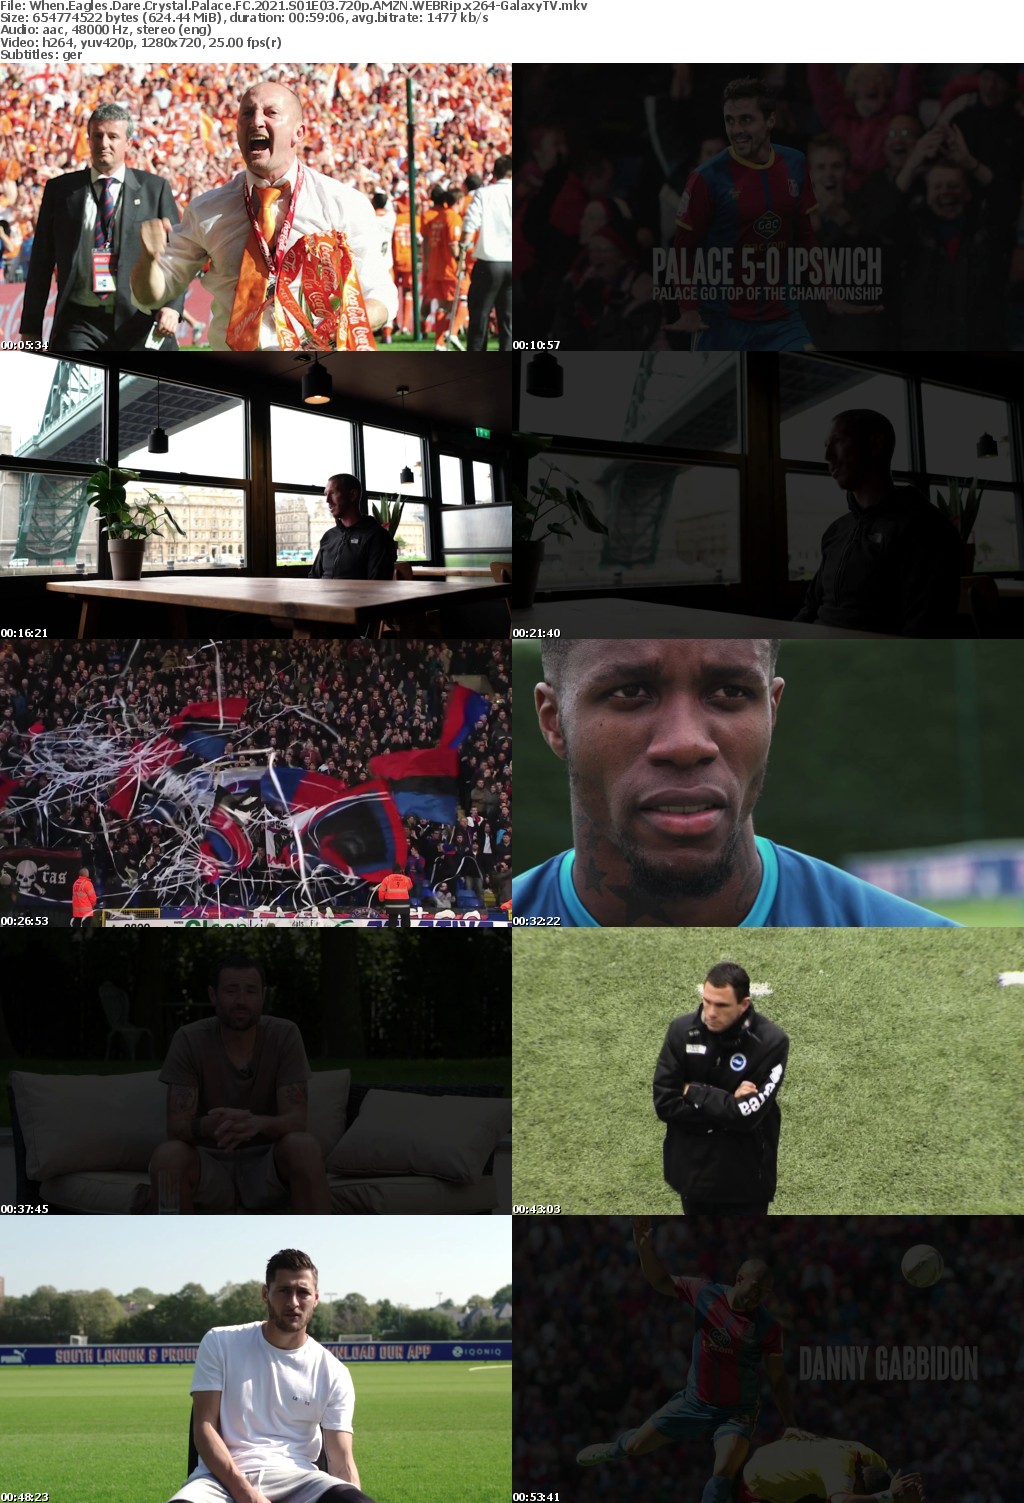 When Eagles Dare Crystal Palace FC 2021 S01 COMPLETE 720p AMZN WEBRip x264-GalaxyTV